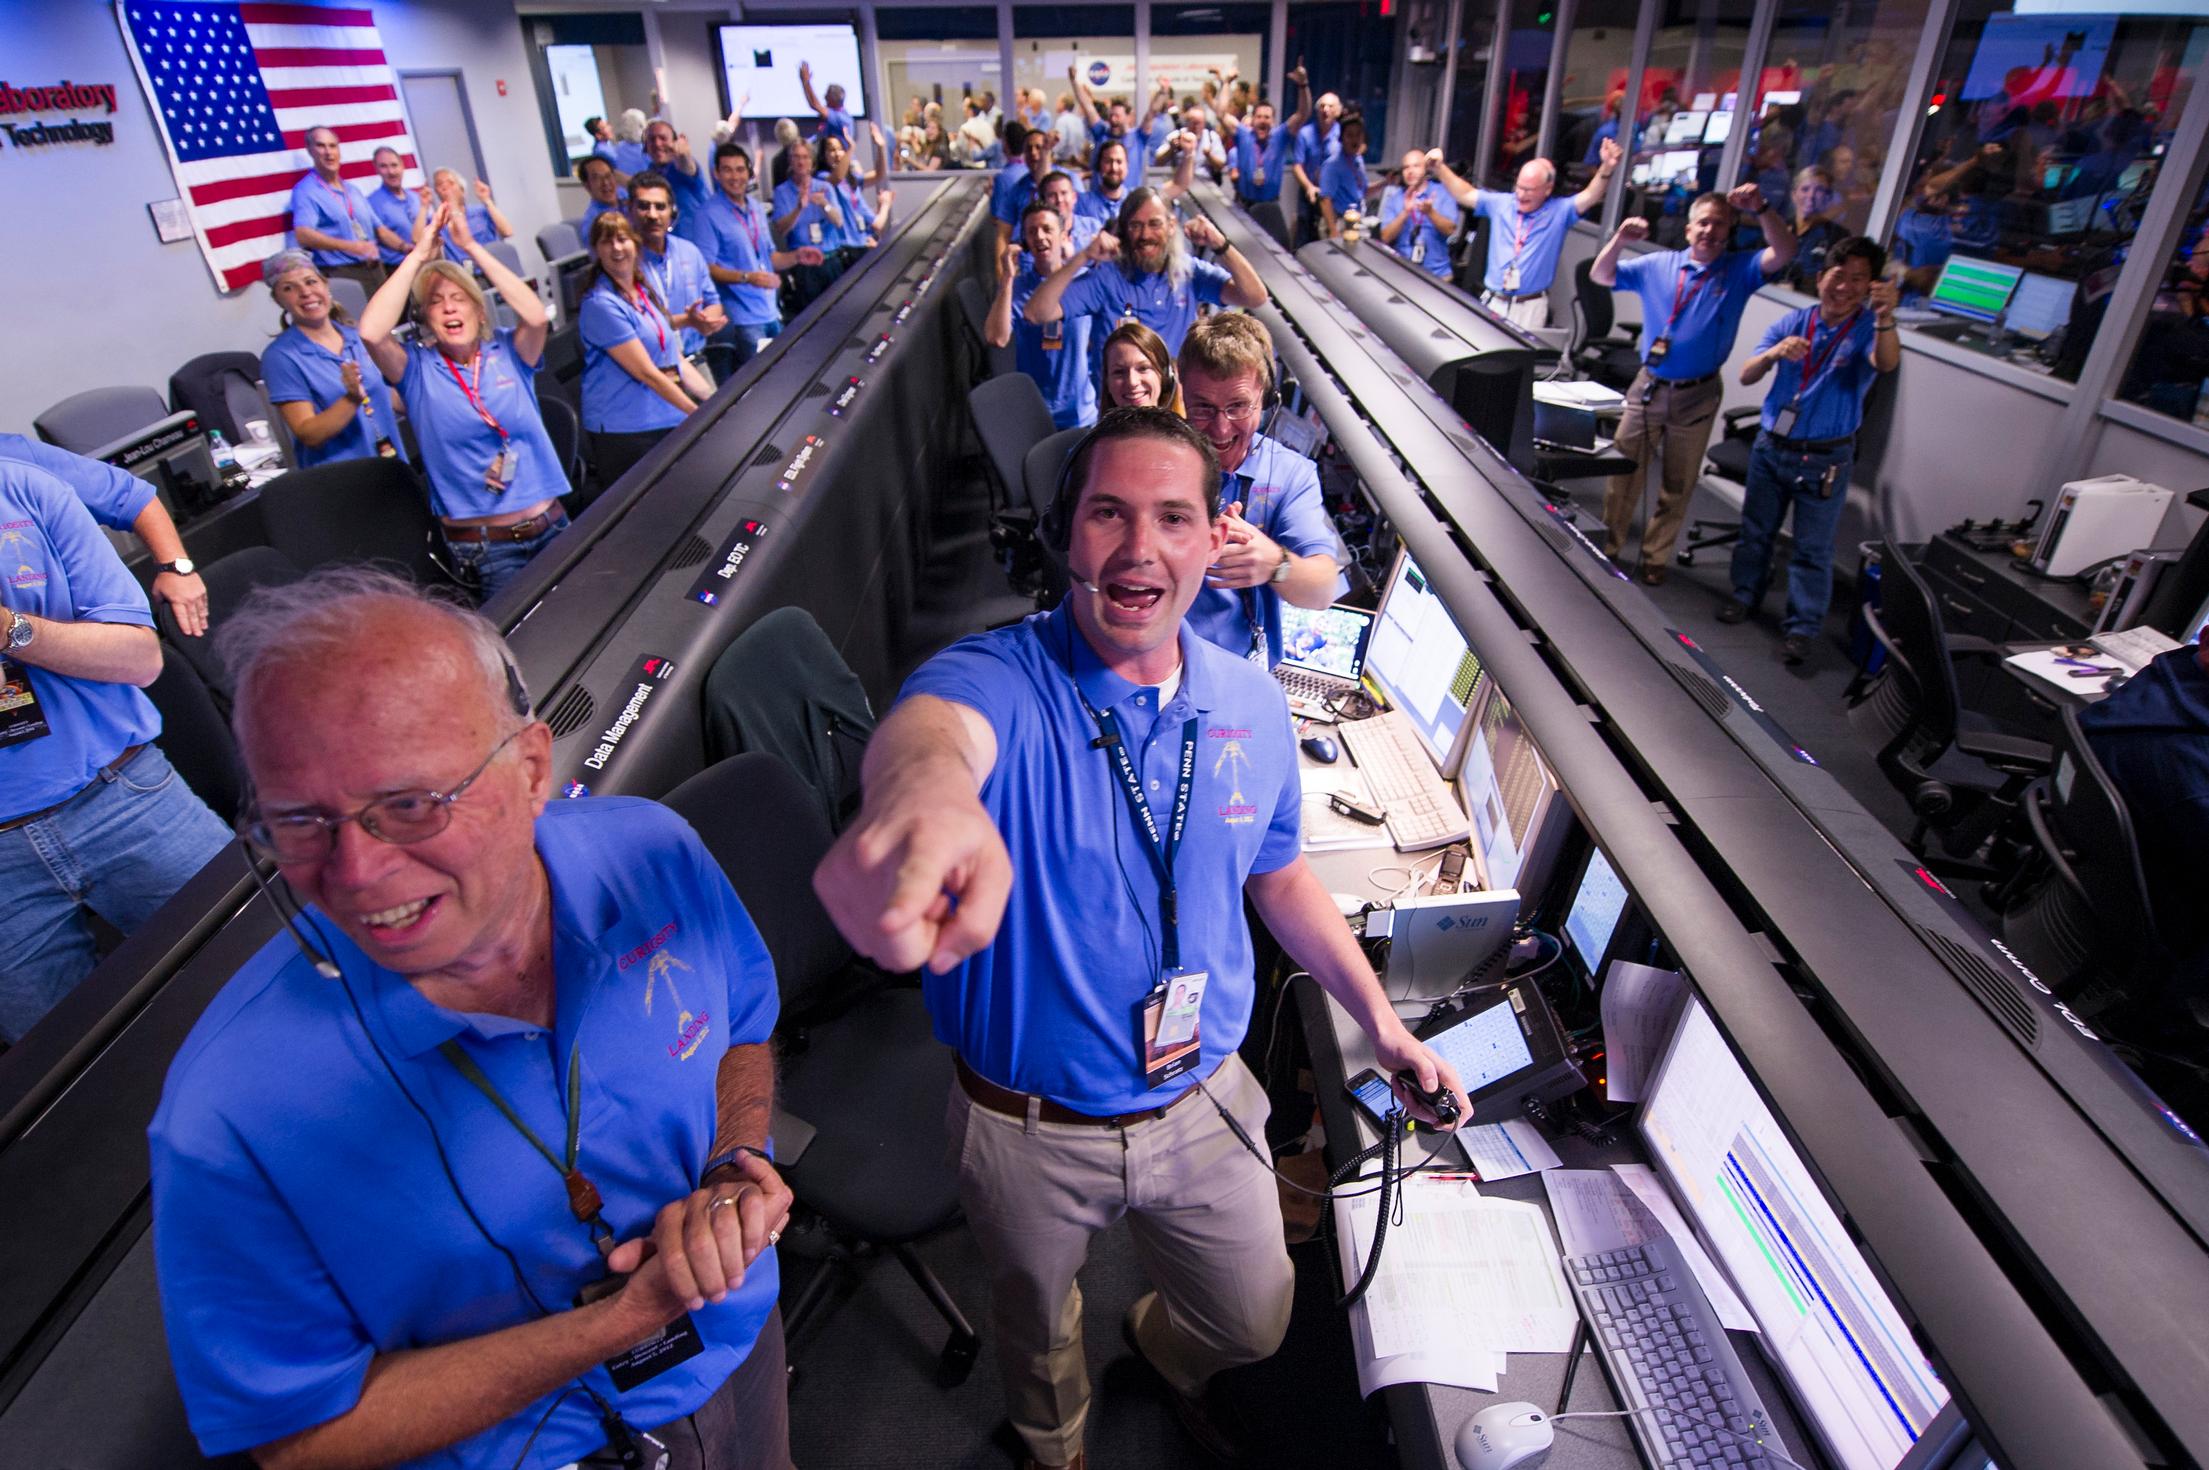 The Mars Science Laboratory (MSL) team in the MSL Mission Support Area react after learning the the Curiosity rove has landed safely on Mars and images start coming in at the Jet Propulsion Laboratory on Mars, Sunday, Aug. 5, 2012 in Pasadena, Calif. The MSL Rover named Curiosity was designed to assess whether Mars ever had an environment able to support small life forms called microbes.